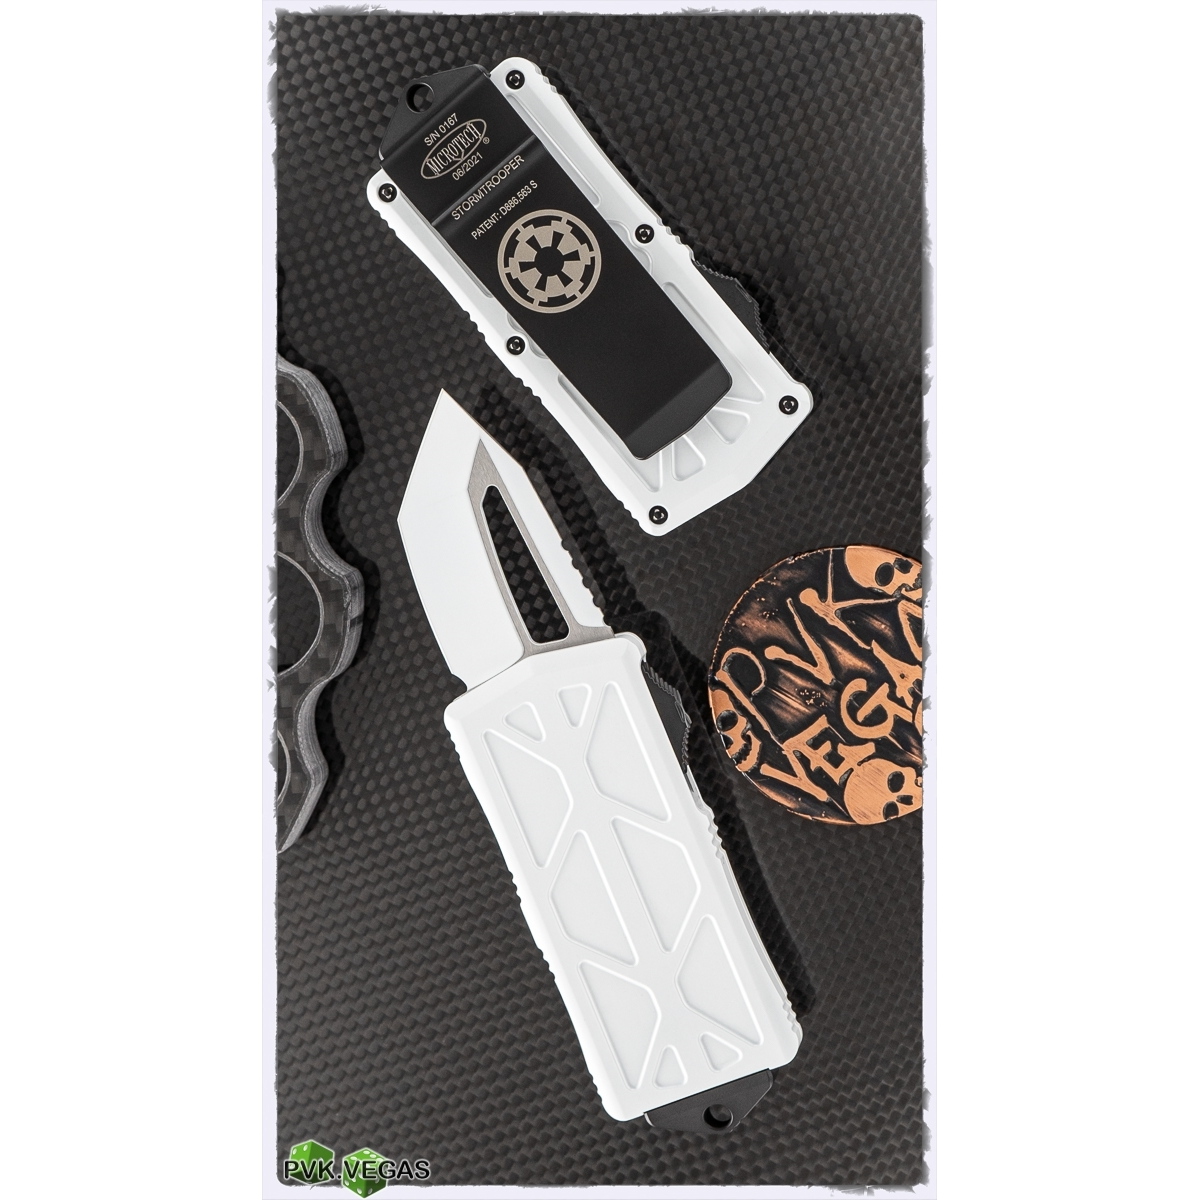 Microtech Exocet Tanto Stormtrooper CA Legal OTF Auto Knife (M390 1.9" White ),158-1ST